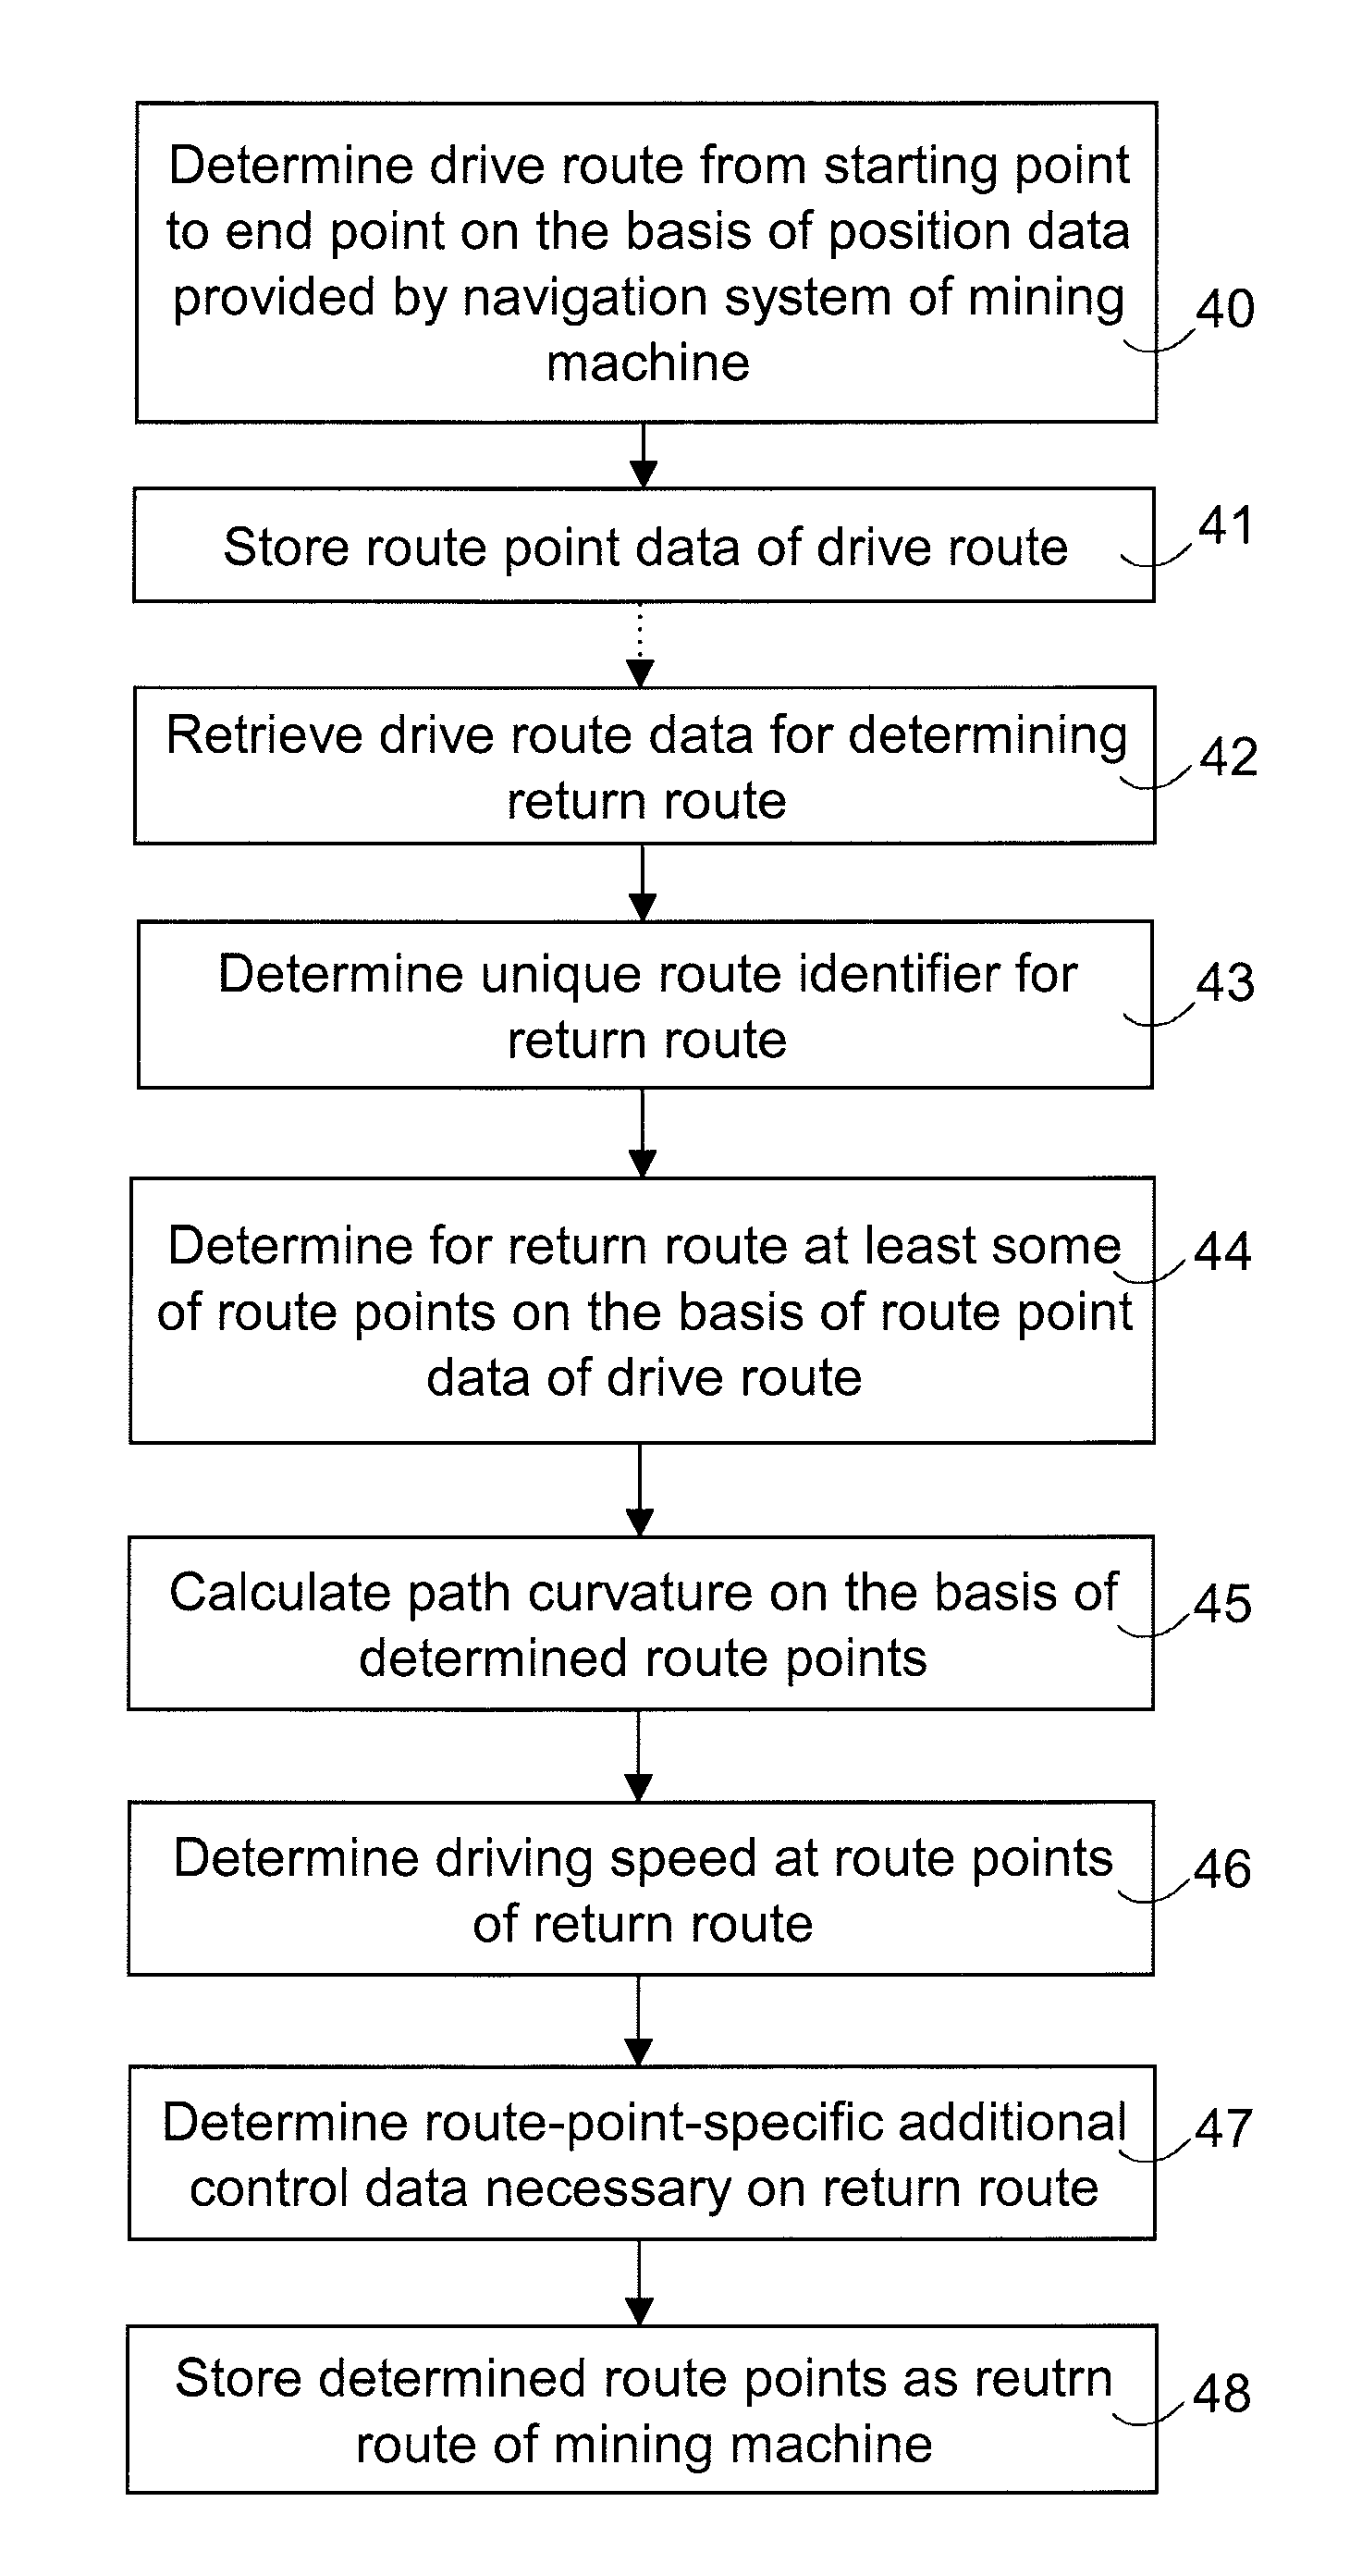 Determination of routes for arranging automatic control of mobile mining machine